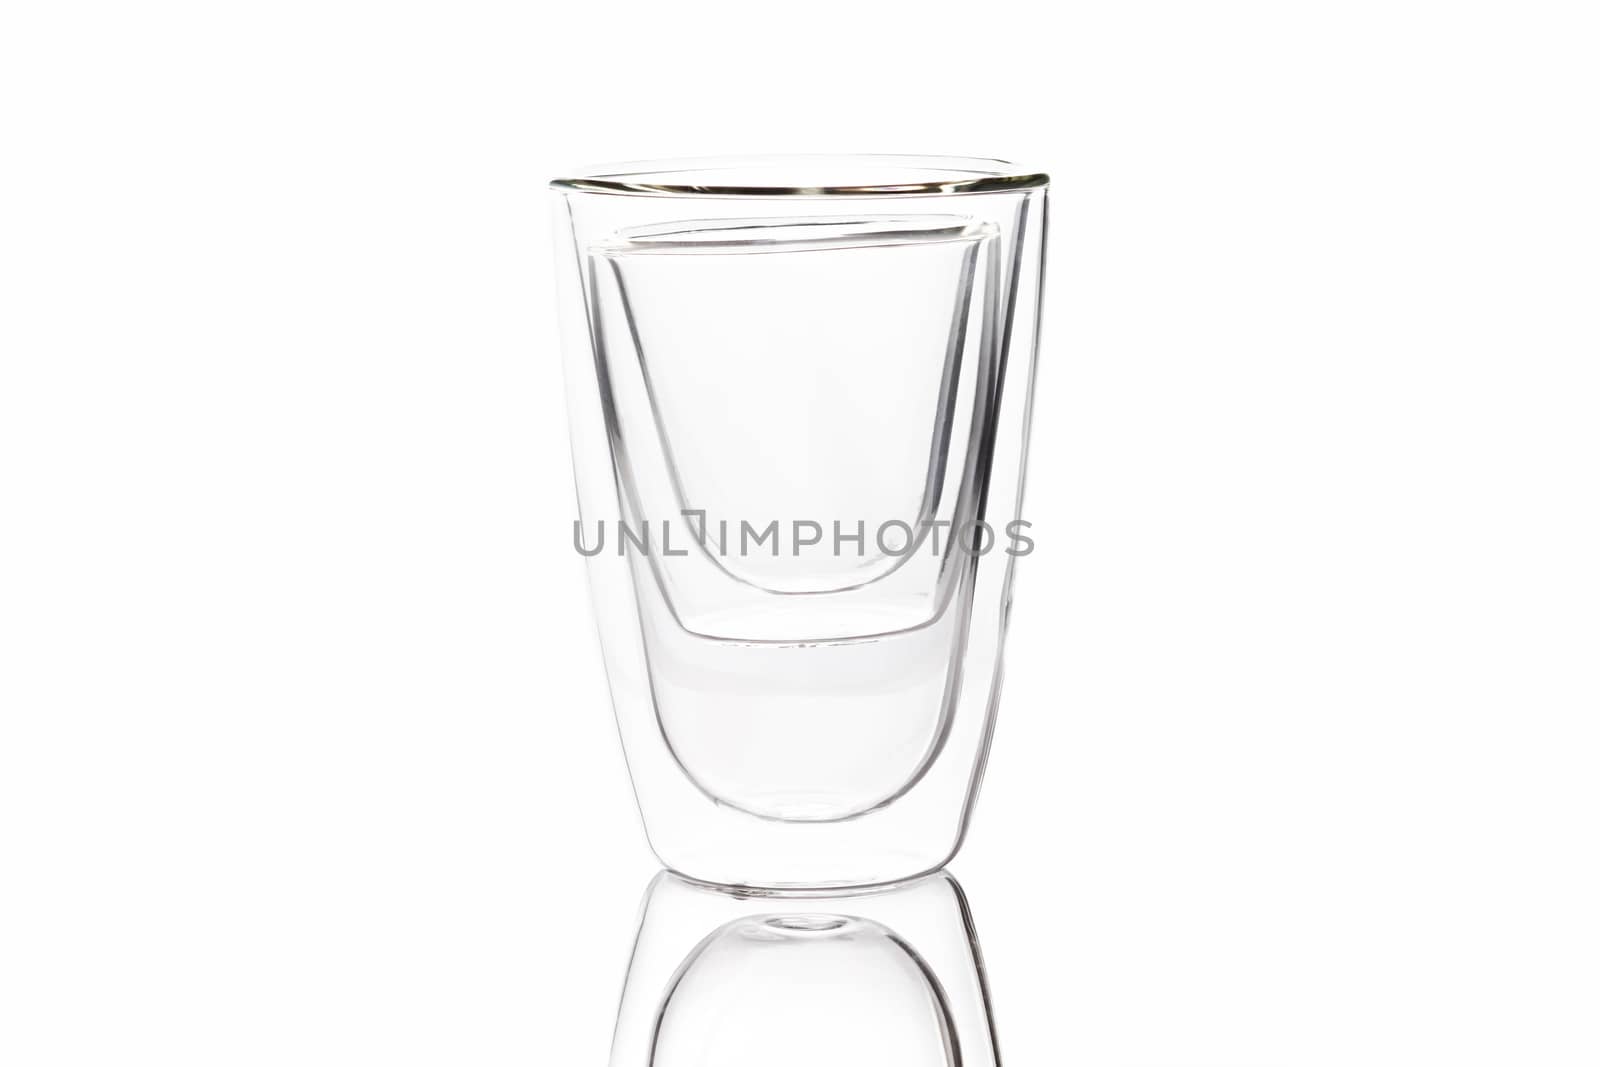 empty clear glass on white background, two layer glass.